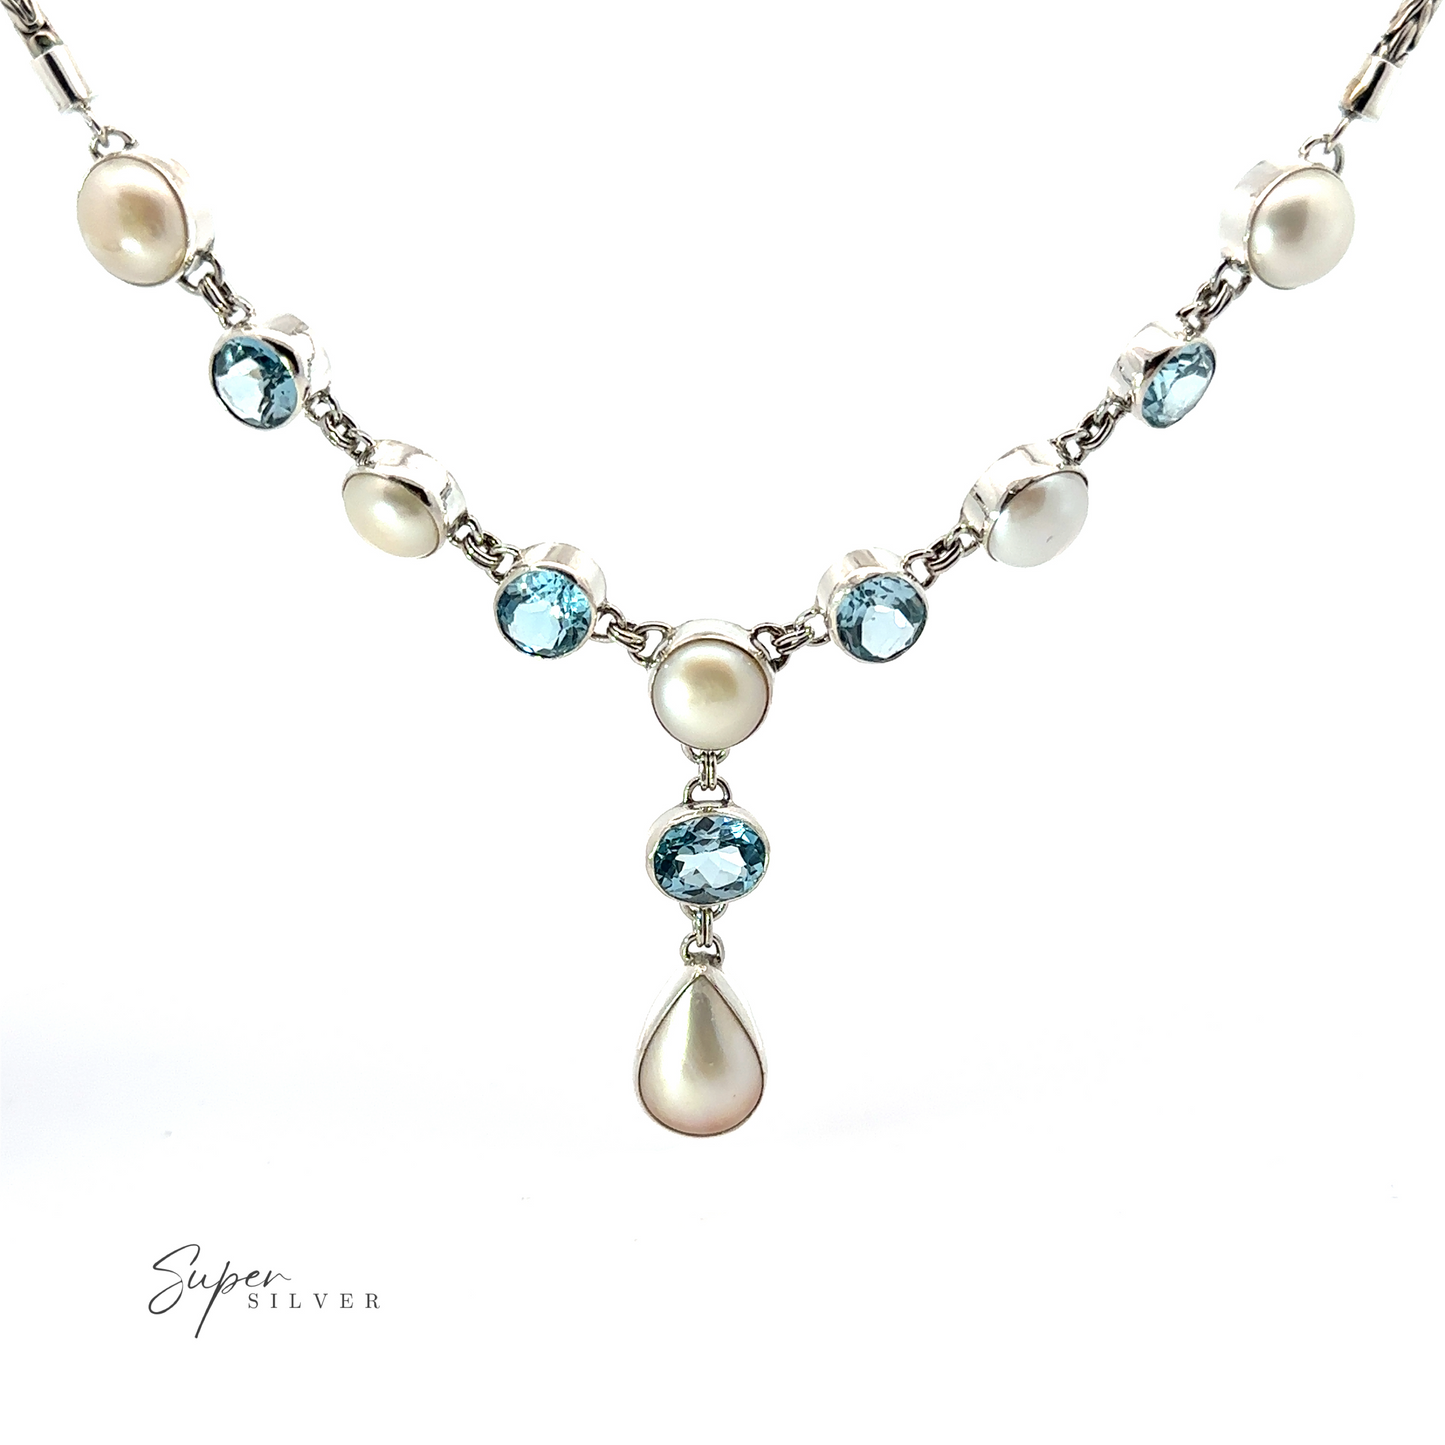 
                  
                    A Stunning Pearl and Gemstone Statement Necklace featuring alternating round blue gemstones and pearls, with a teardrop-shaped pearl pendant in the center. Crafted in Sterling Silver, it proudly displays "Super Silver" in the lower left corner.
                  
                